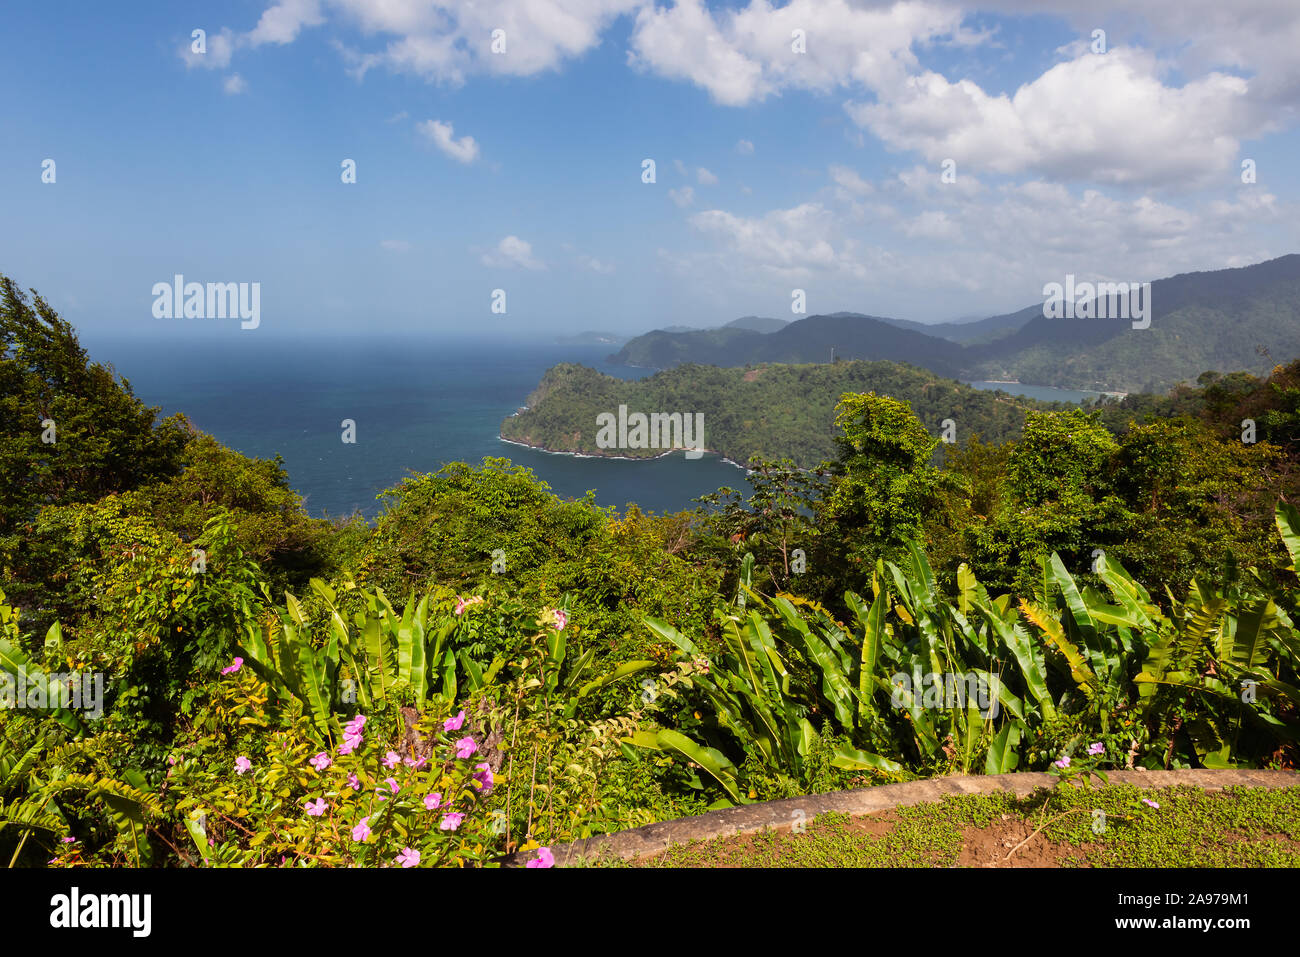 Beautiful scenery look out landscape Trinidad north coast ocean tropical Stock Photo